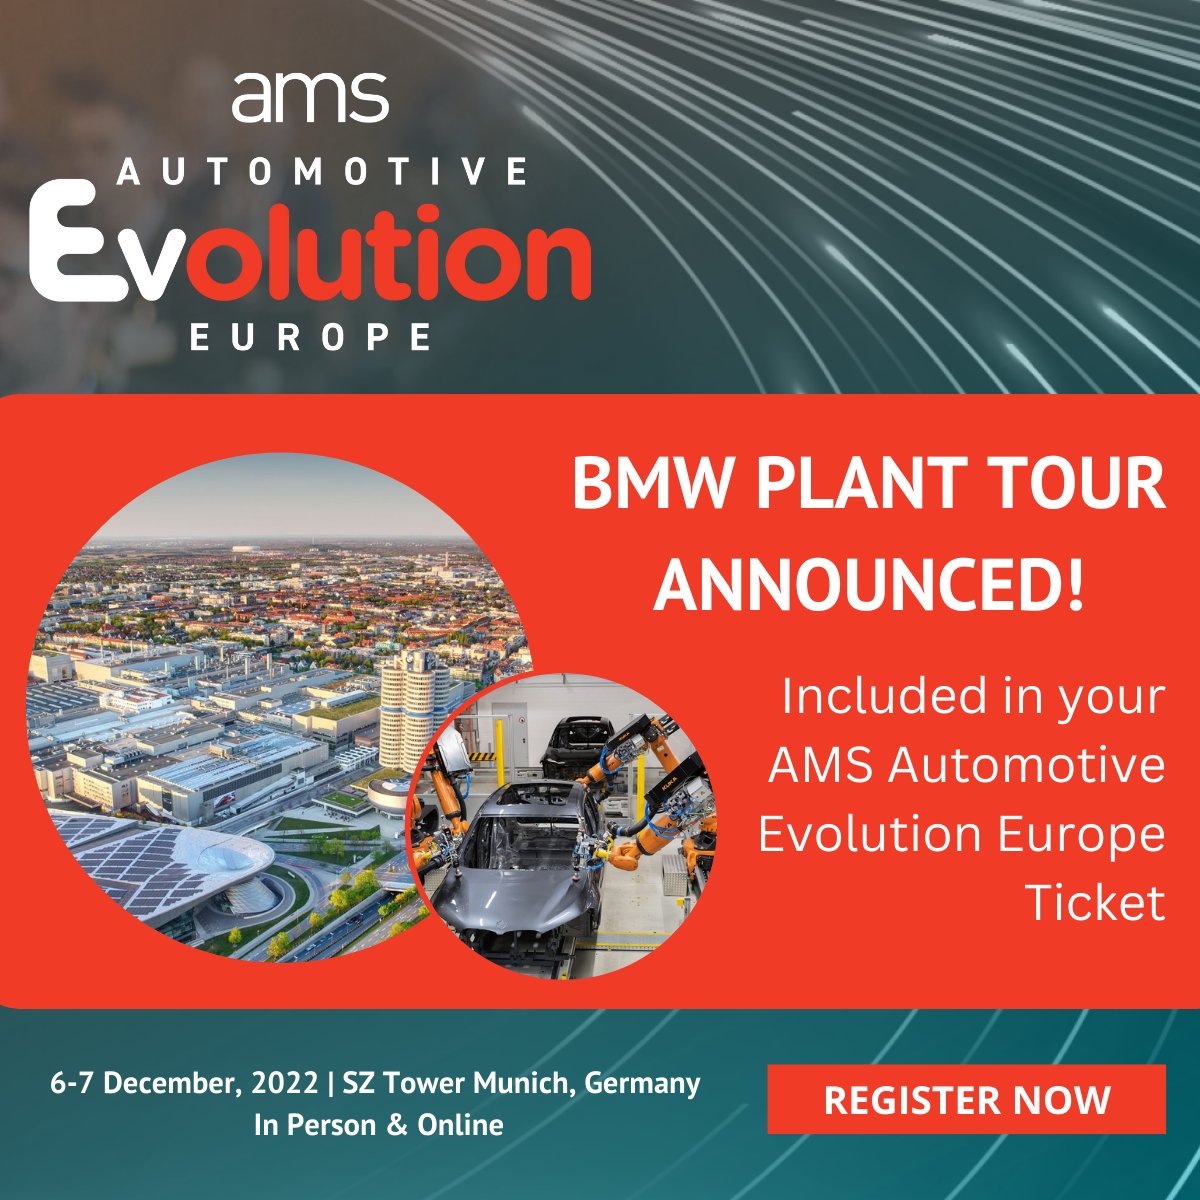 BMW Plant Tour Announced! Included in your ticket to AMS Automotive Evolution Europe 2022. Join us for the opportunity to see inside BMW’s digital and electrification transformation at its mother plant in Munich. Early bird ticket offer ends today > bit.ly/3U6mBvb